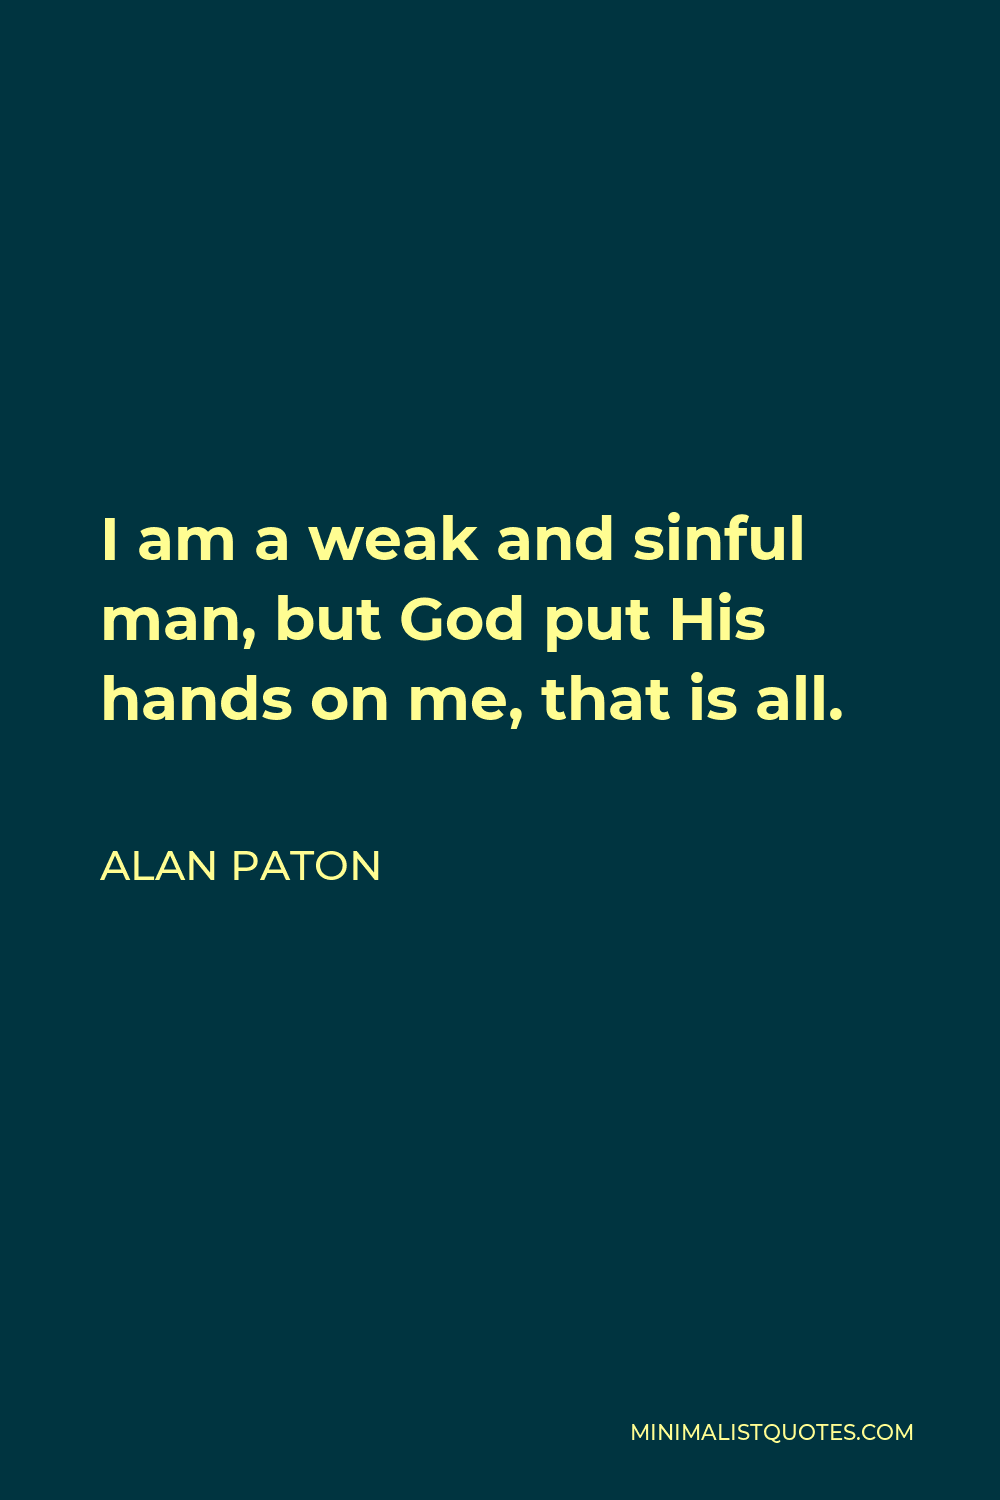 Alan Paton Quote - I am a weak and sinful man, but God put His hands on me, that is all.